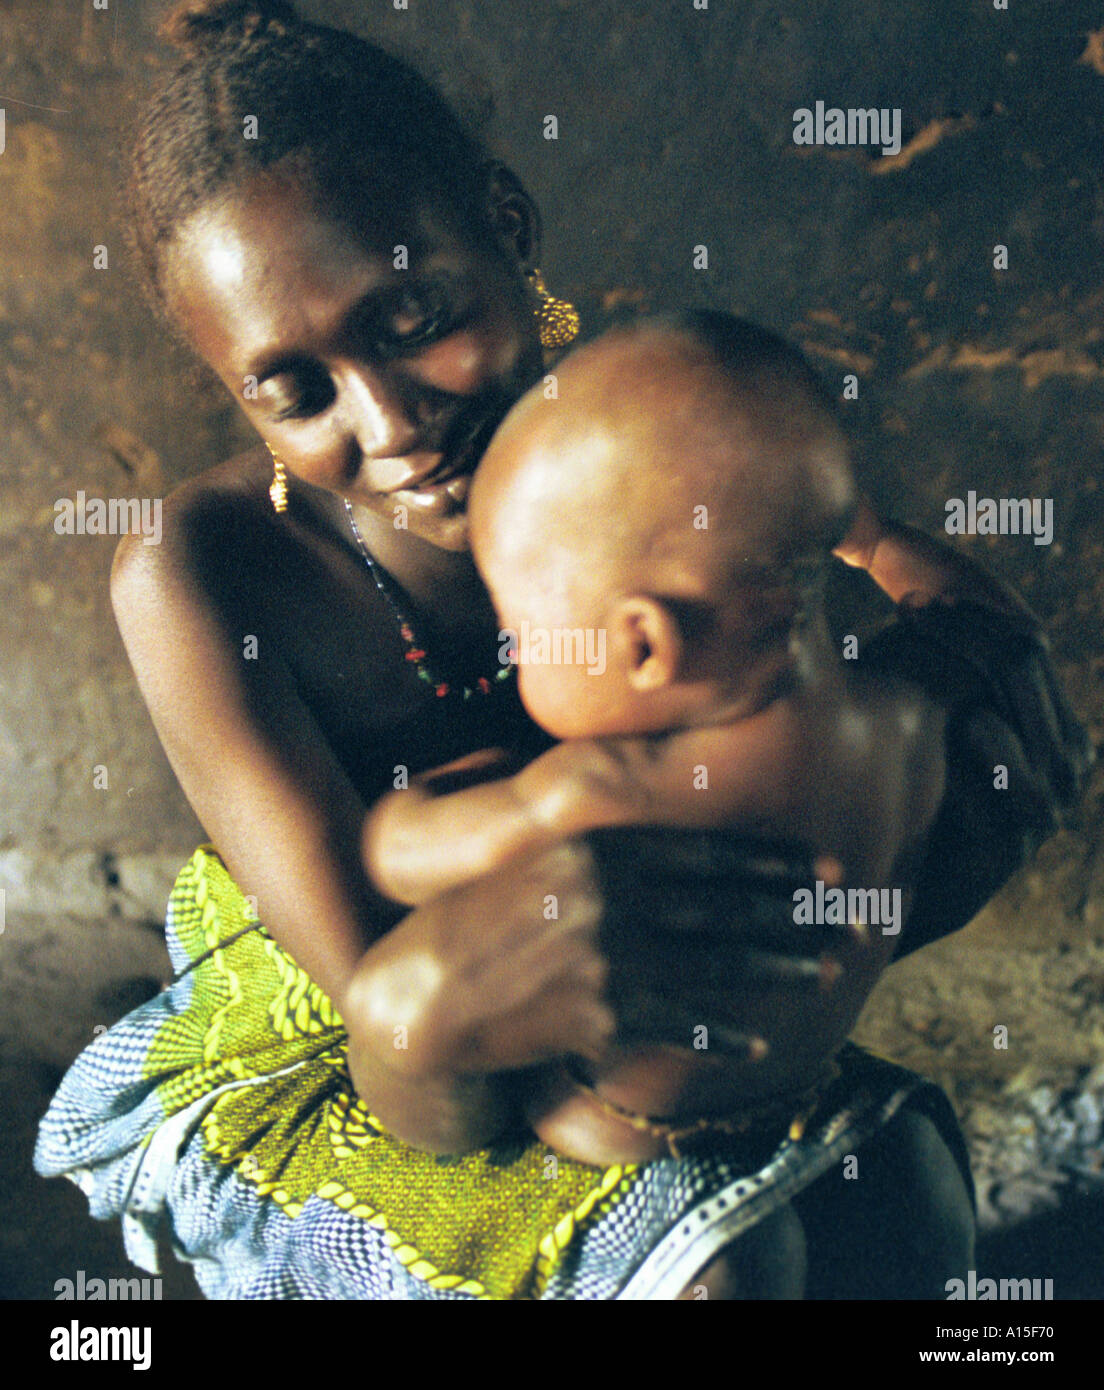 Halima Balde holds her new born baby inside the dimly lit mud hut in the Muslim Fulani village of Dempel Jumpora in Guinea Stock Photo